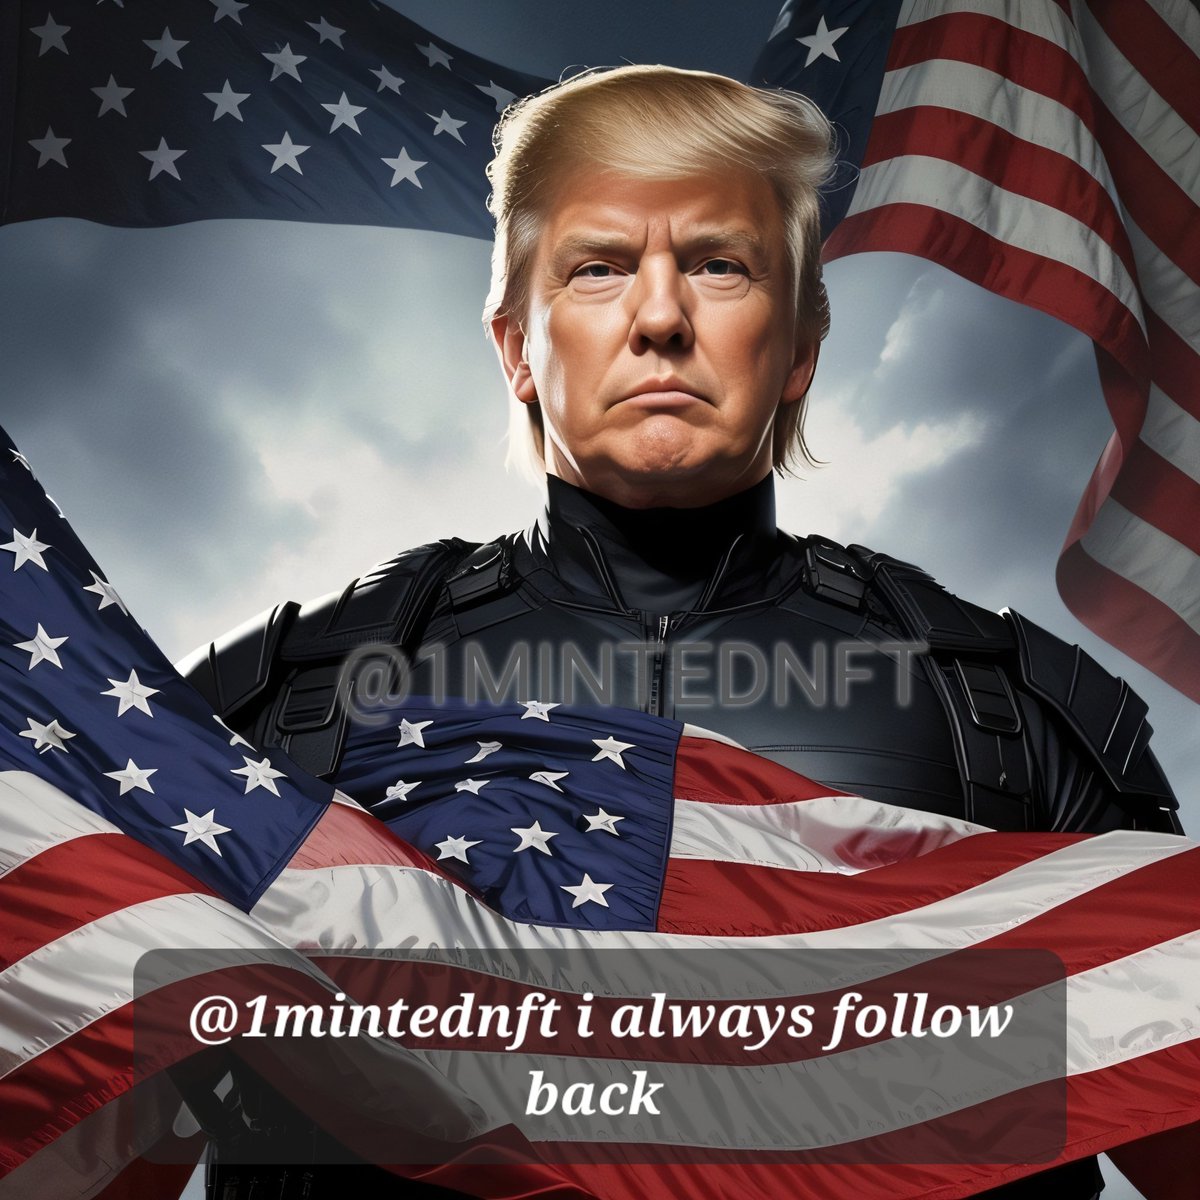 @bdonesem @laura_7771 @Ikennect @WenMaMa2 @emma6USA @UnsinkableDolly @USA4ever65 @WhiskyKilo61 @RnkSt7 @1stMzZee @BGHatesTrains13 @bulldog_spirit2 @Jothedeplorable @MatthewNichol5 @Claudin216 @safety_cop @jncojok @ImaP91 @FerreedomReign @oh_laa_laa Thank you so much for the include with all the great ppl 

Please follow @bdonesem